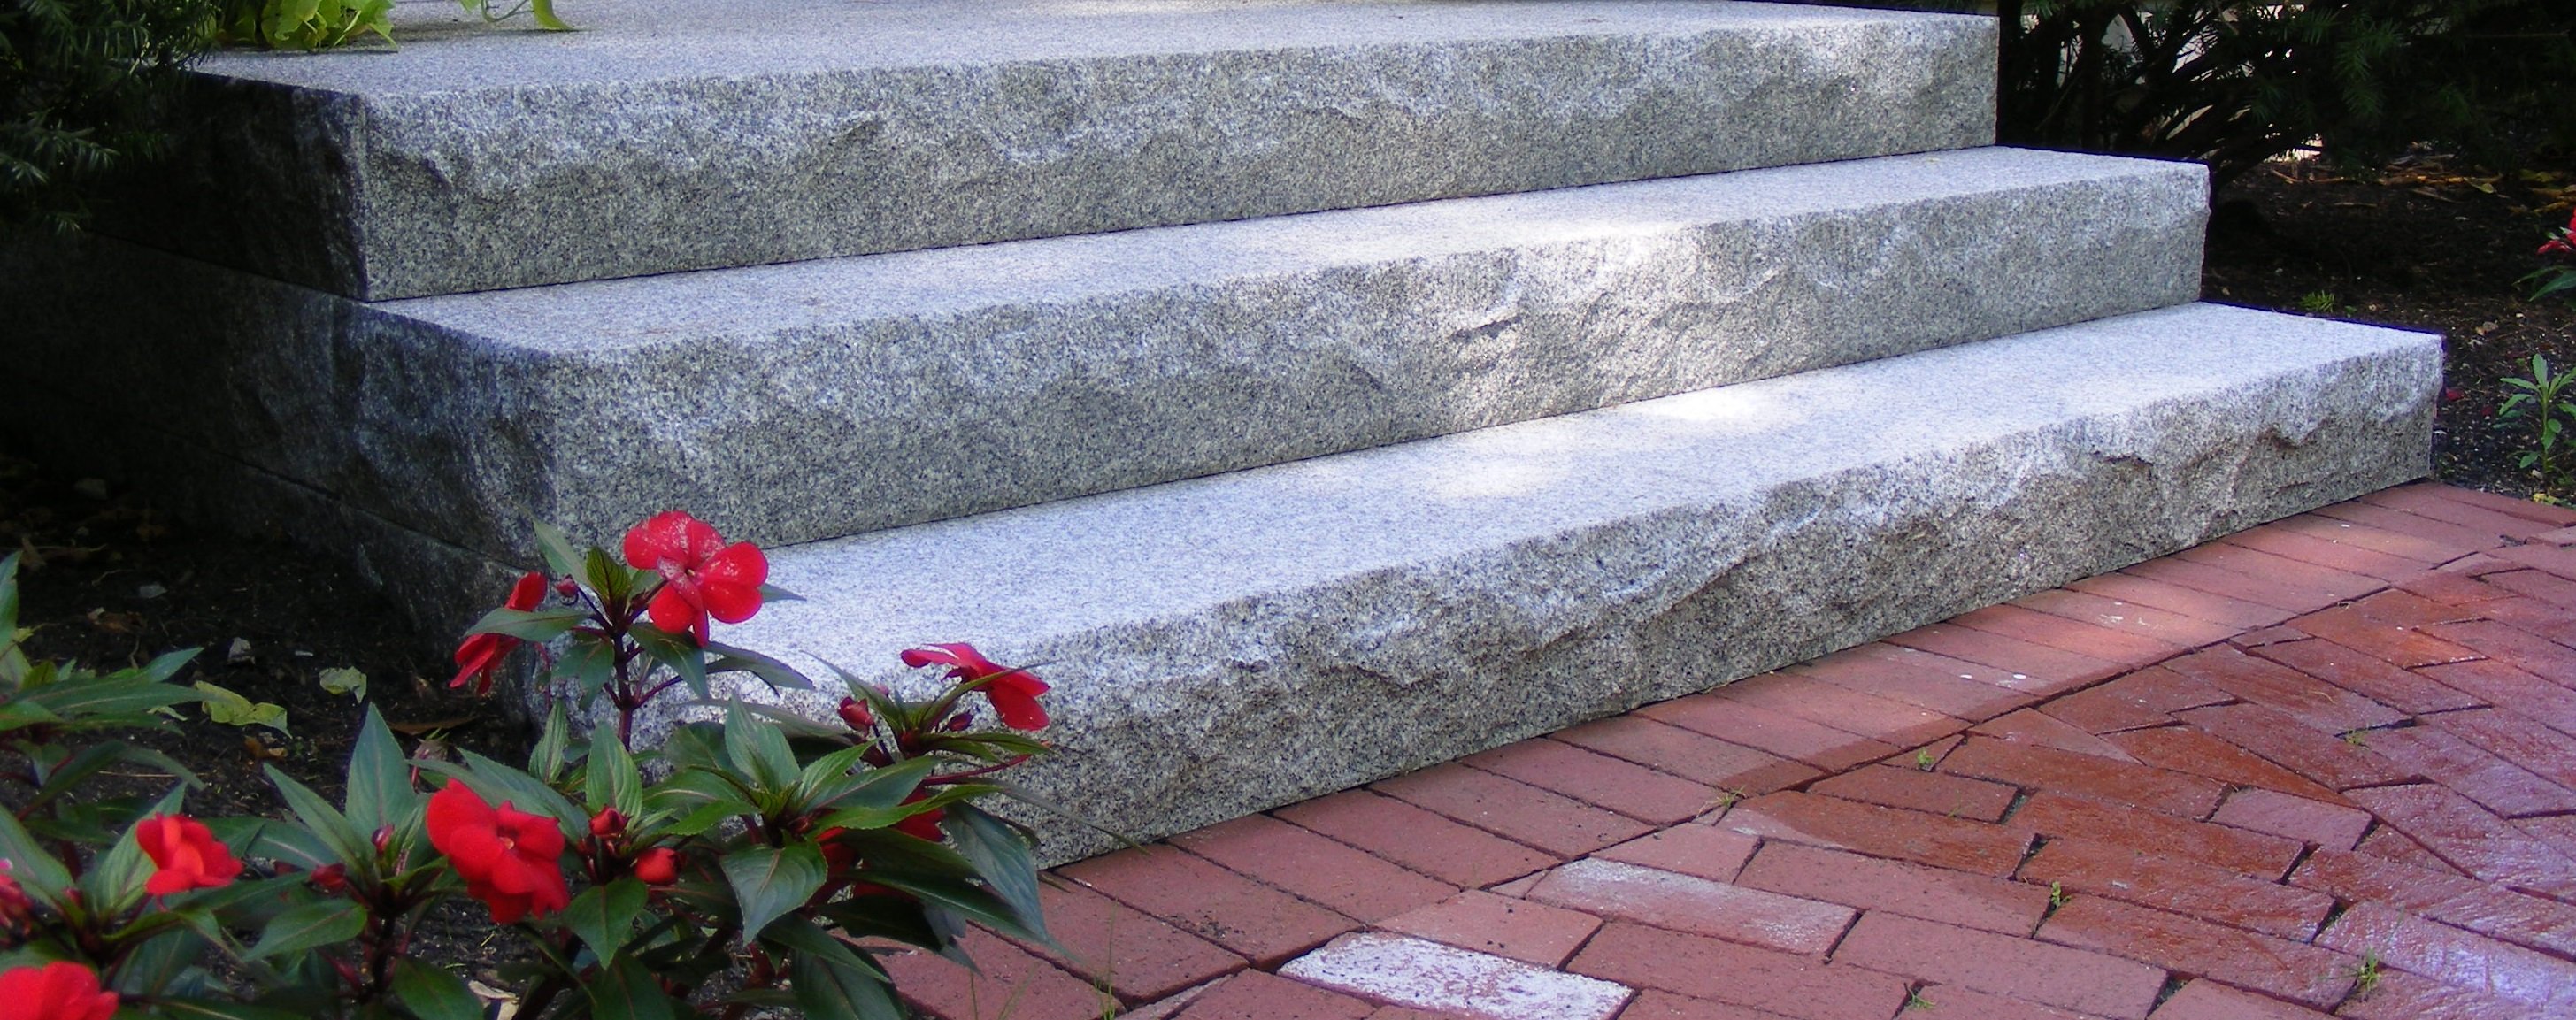 Transform A Door Into An Entrance How To Install Granite Entry Steps